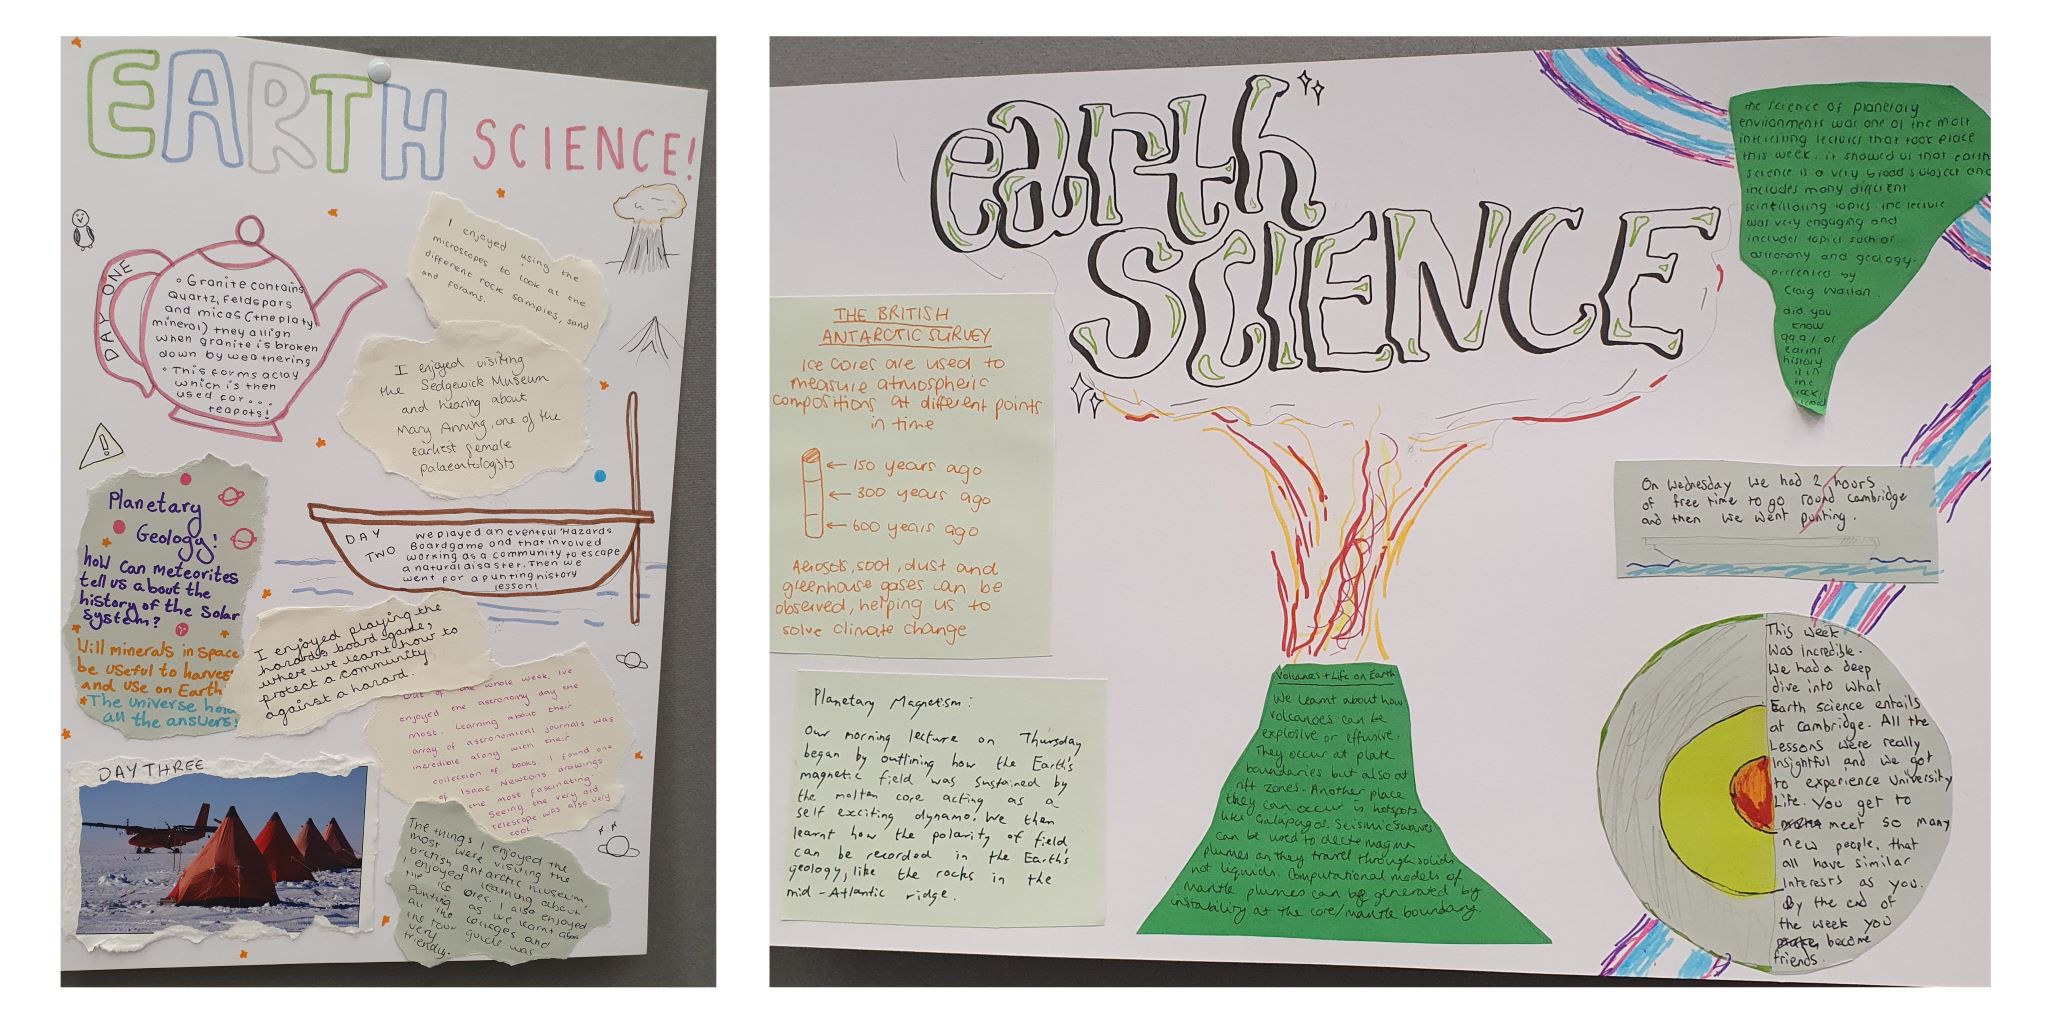 Photo showing two posters with feedback from the students